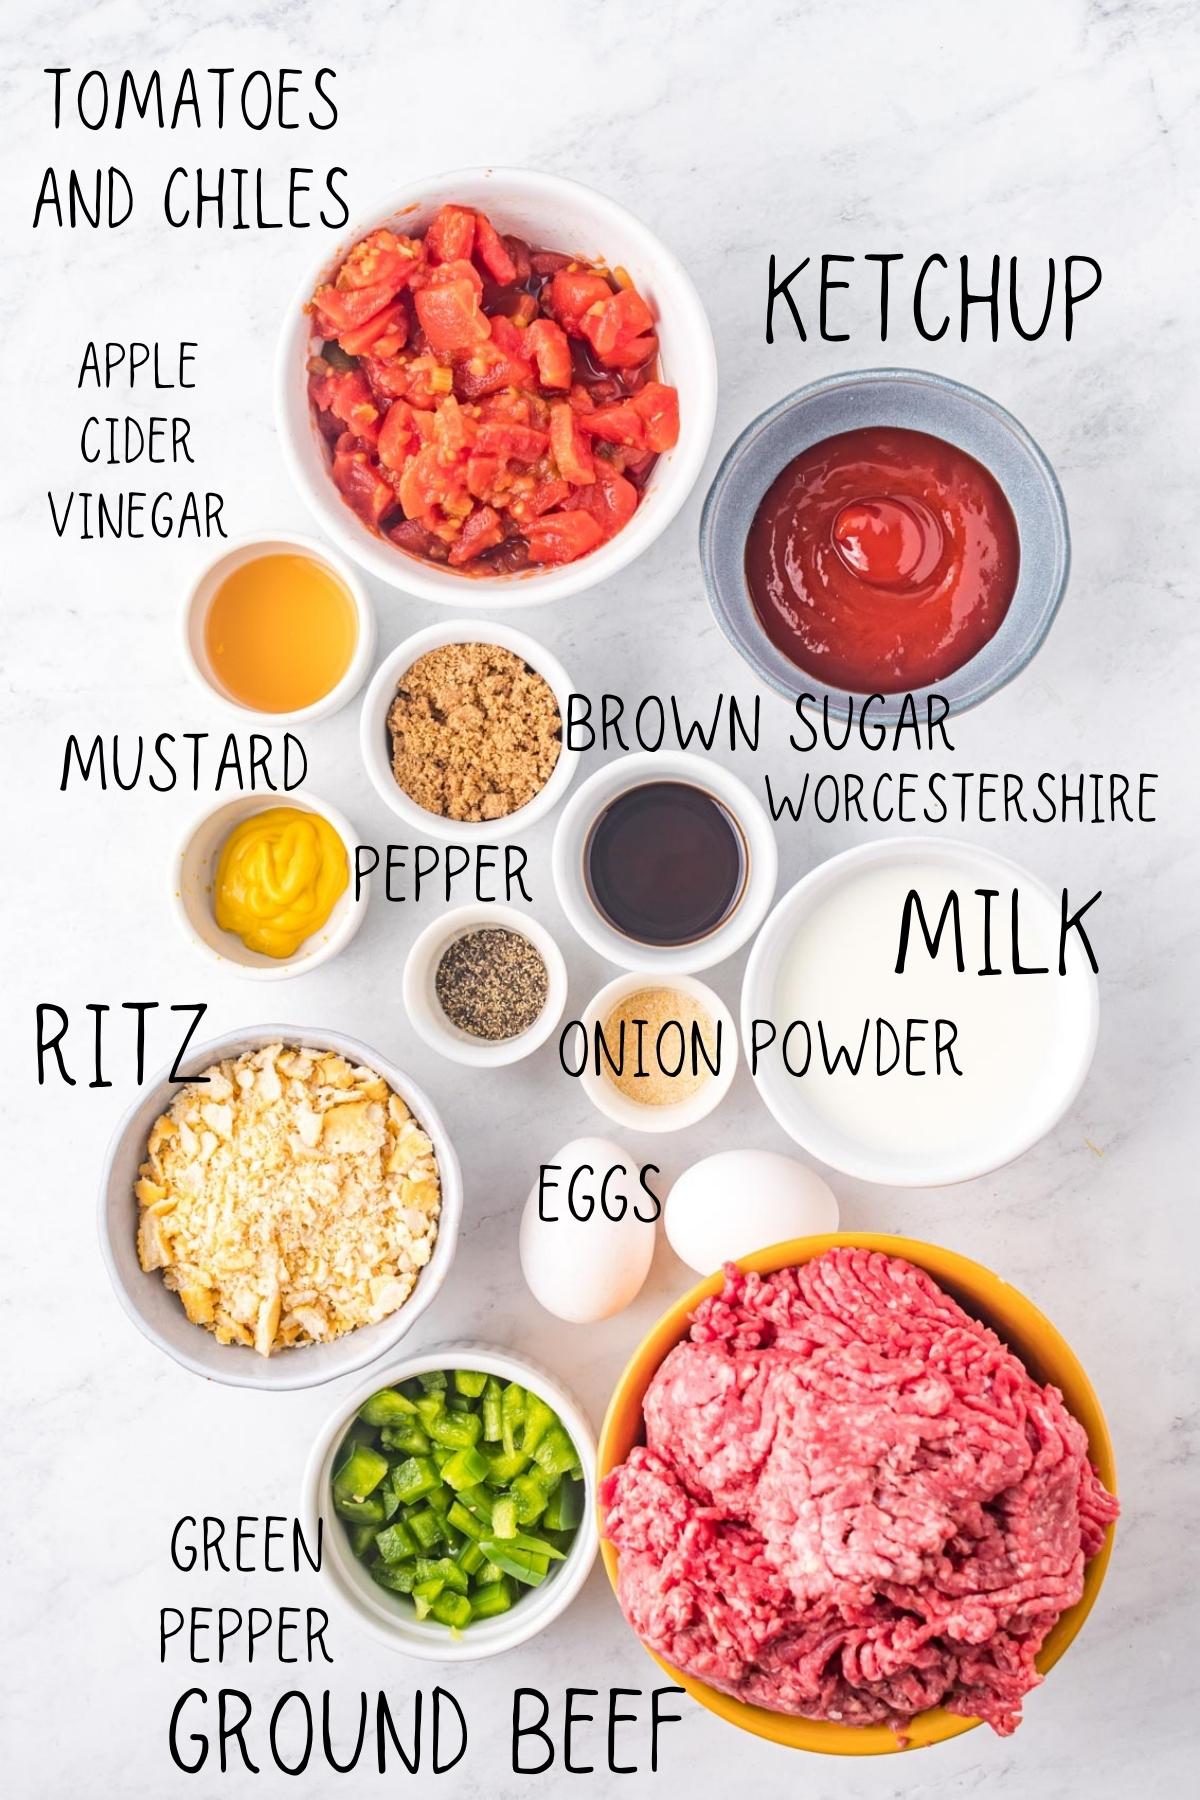 ingredients for southern style meatloaf including ketchup, ritz crackers, brown sugar, mustard, worcestershire sauce, eggs, onion powder and ground beef